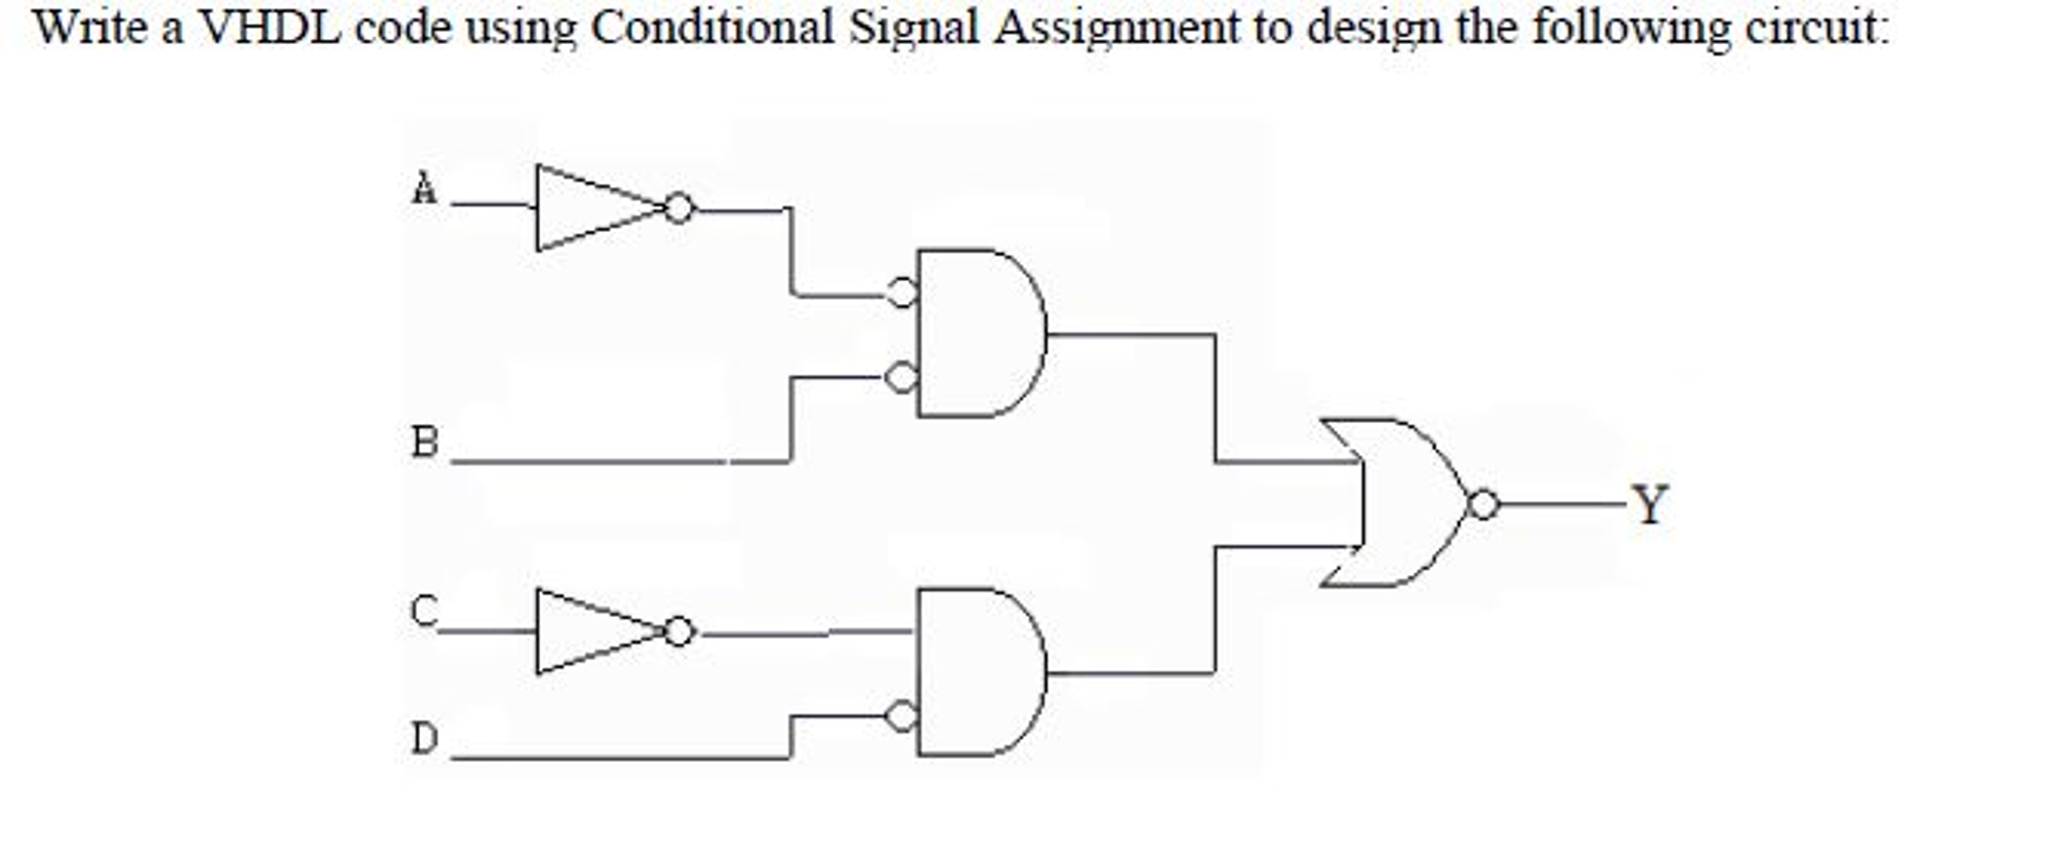 vhdl assignment in conditional